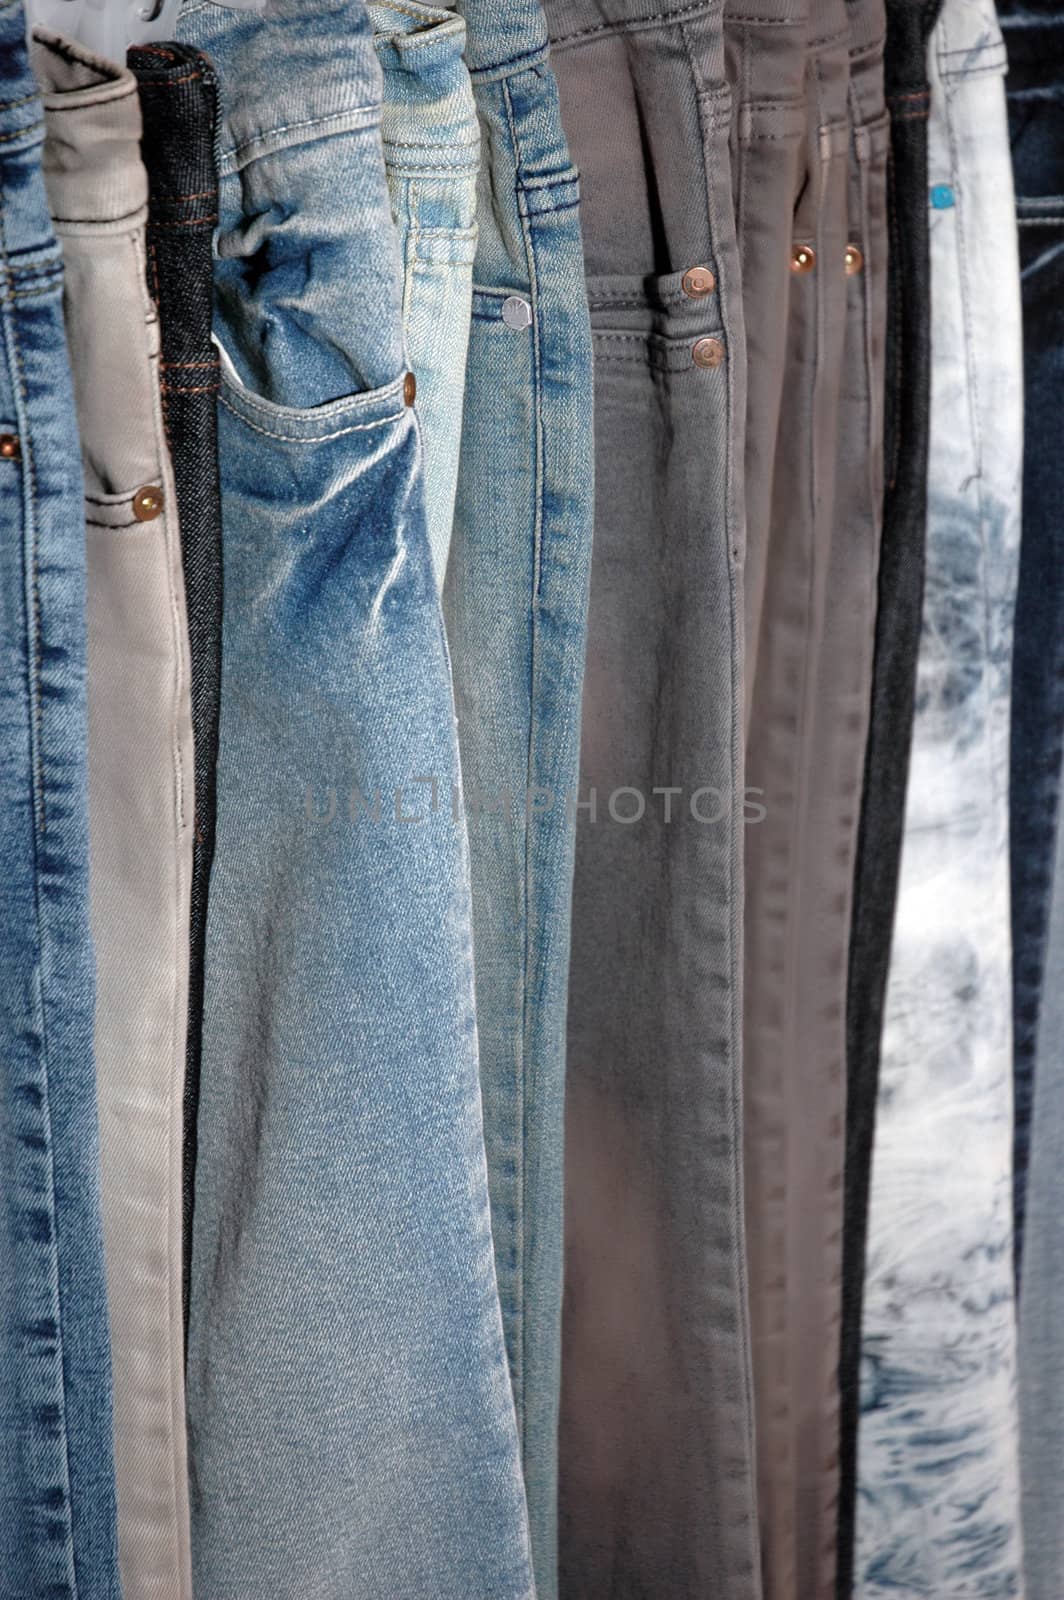 line of jeans by antonihalim